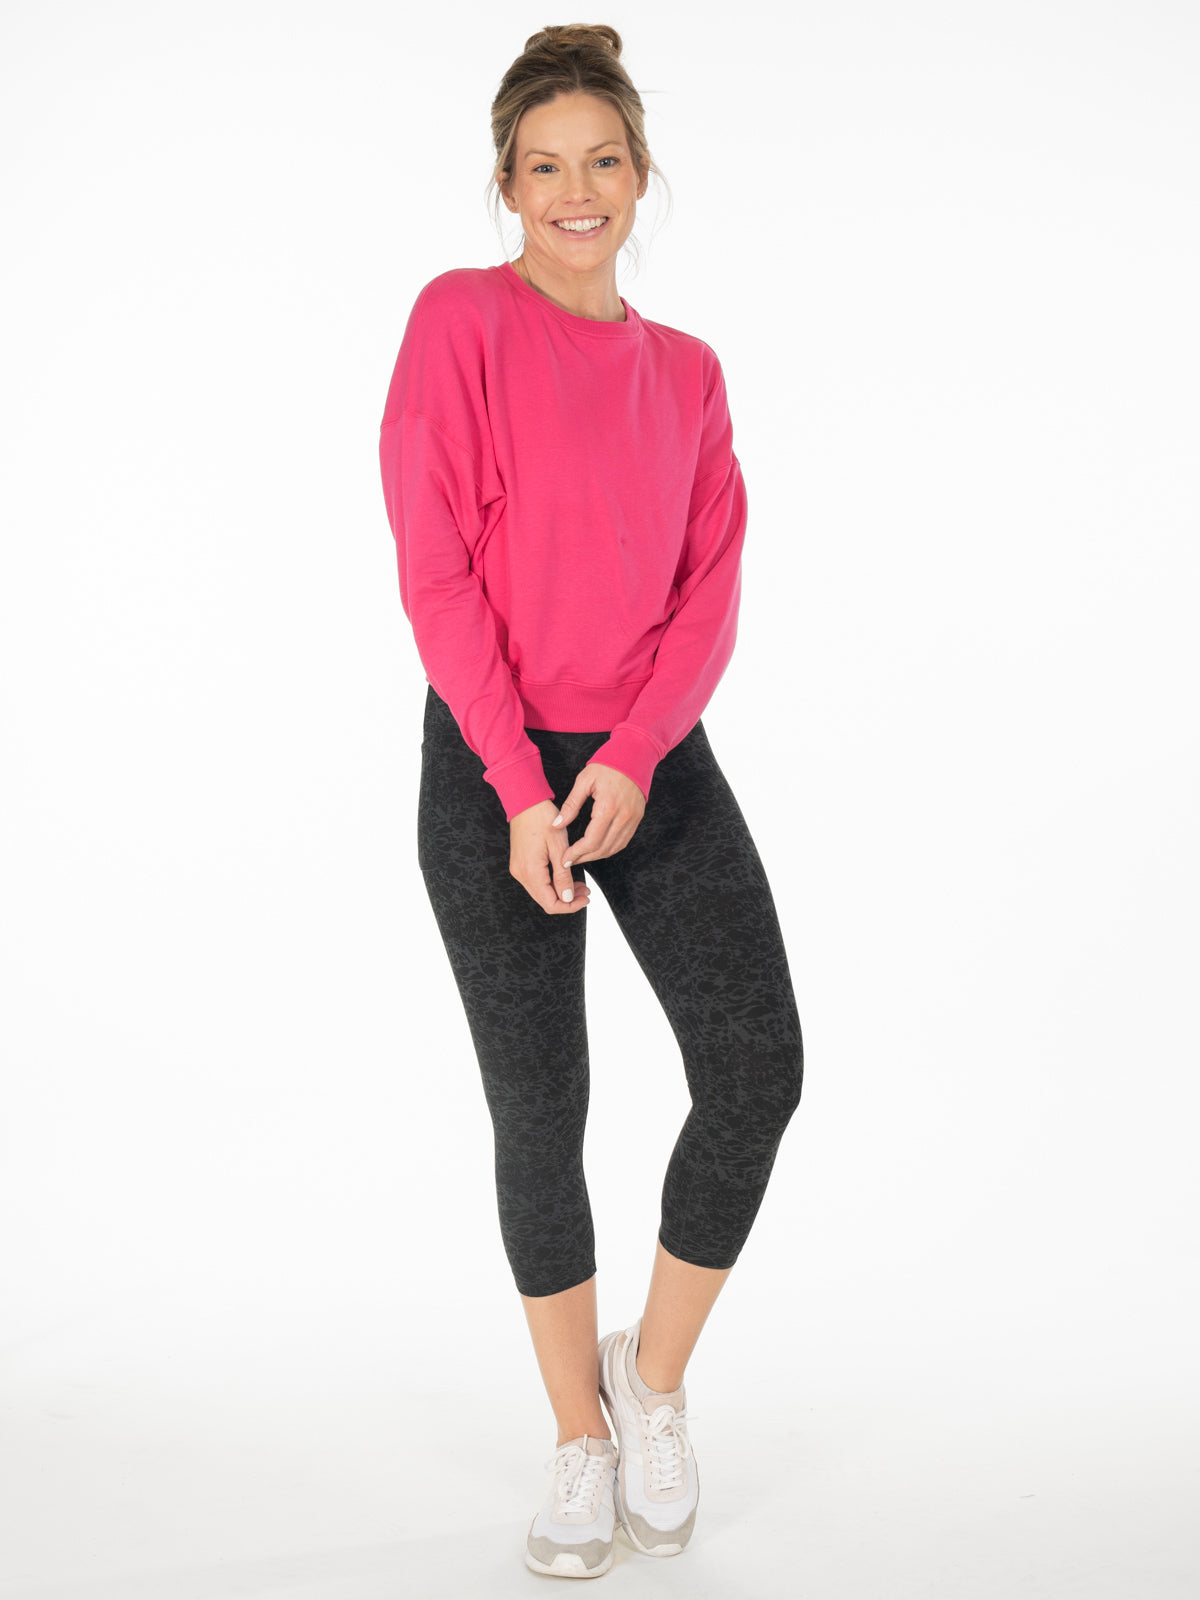 Women's Buttery Soft Activewear Leggings (XL only) - Wholesale 